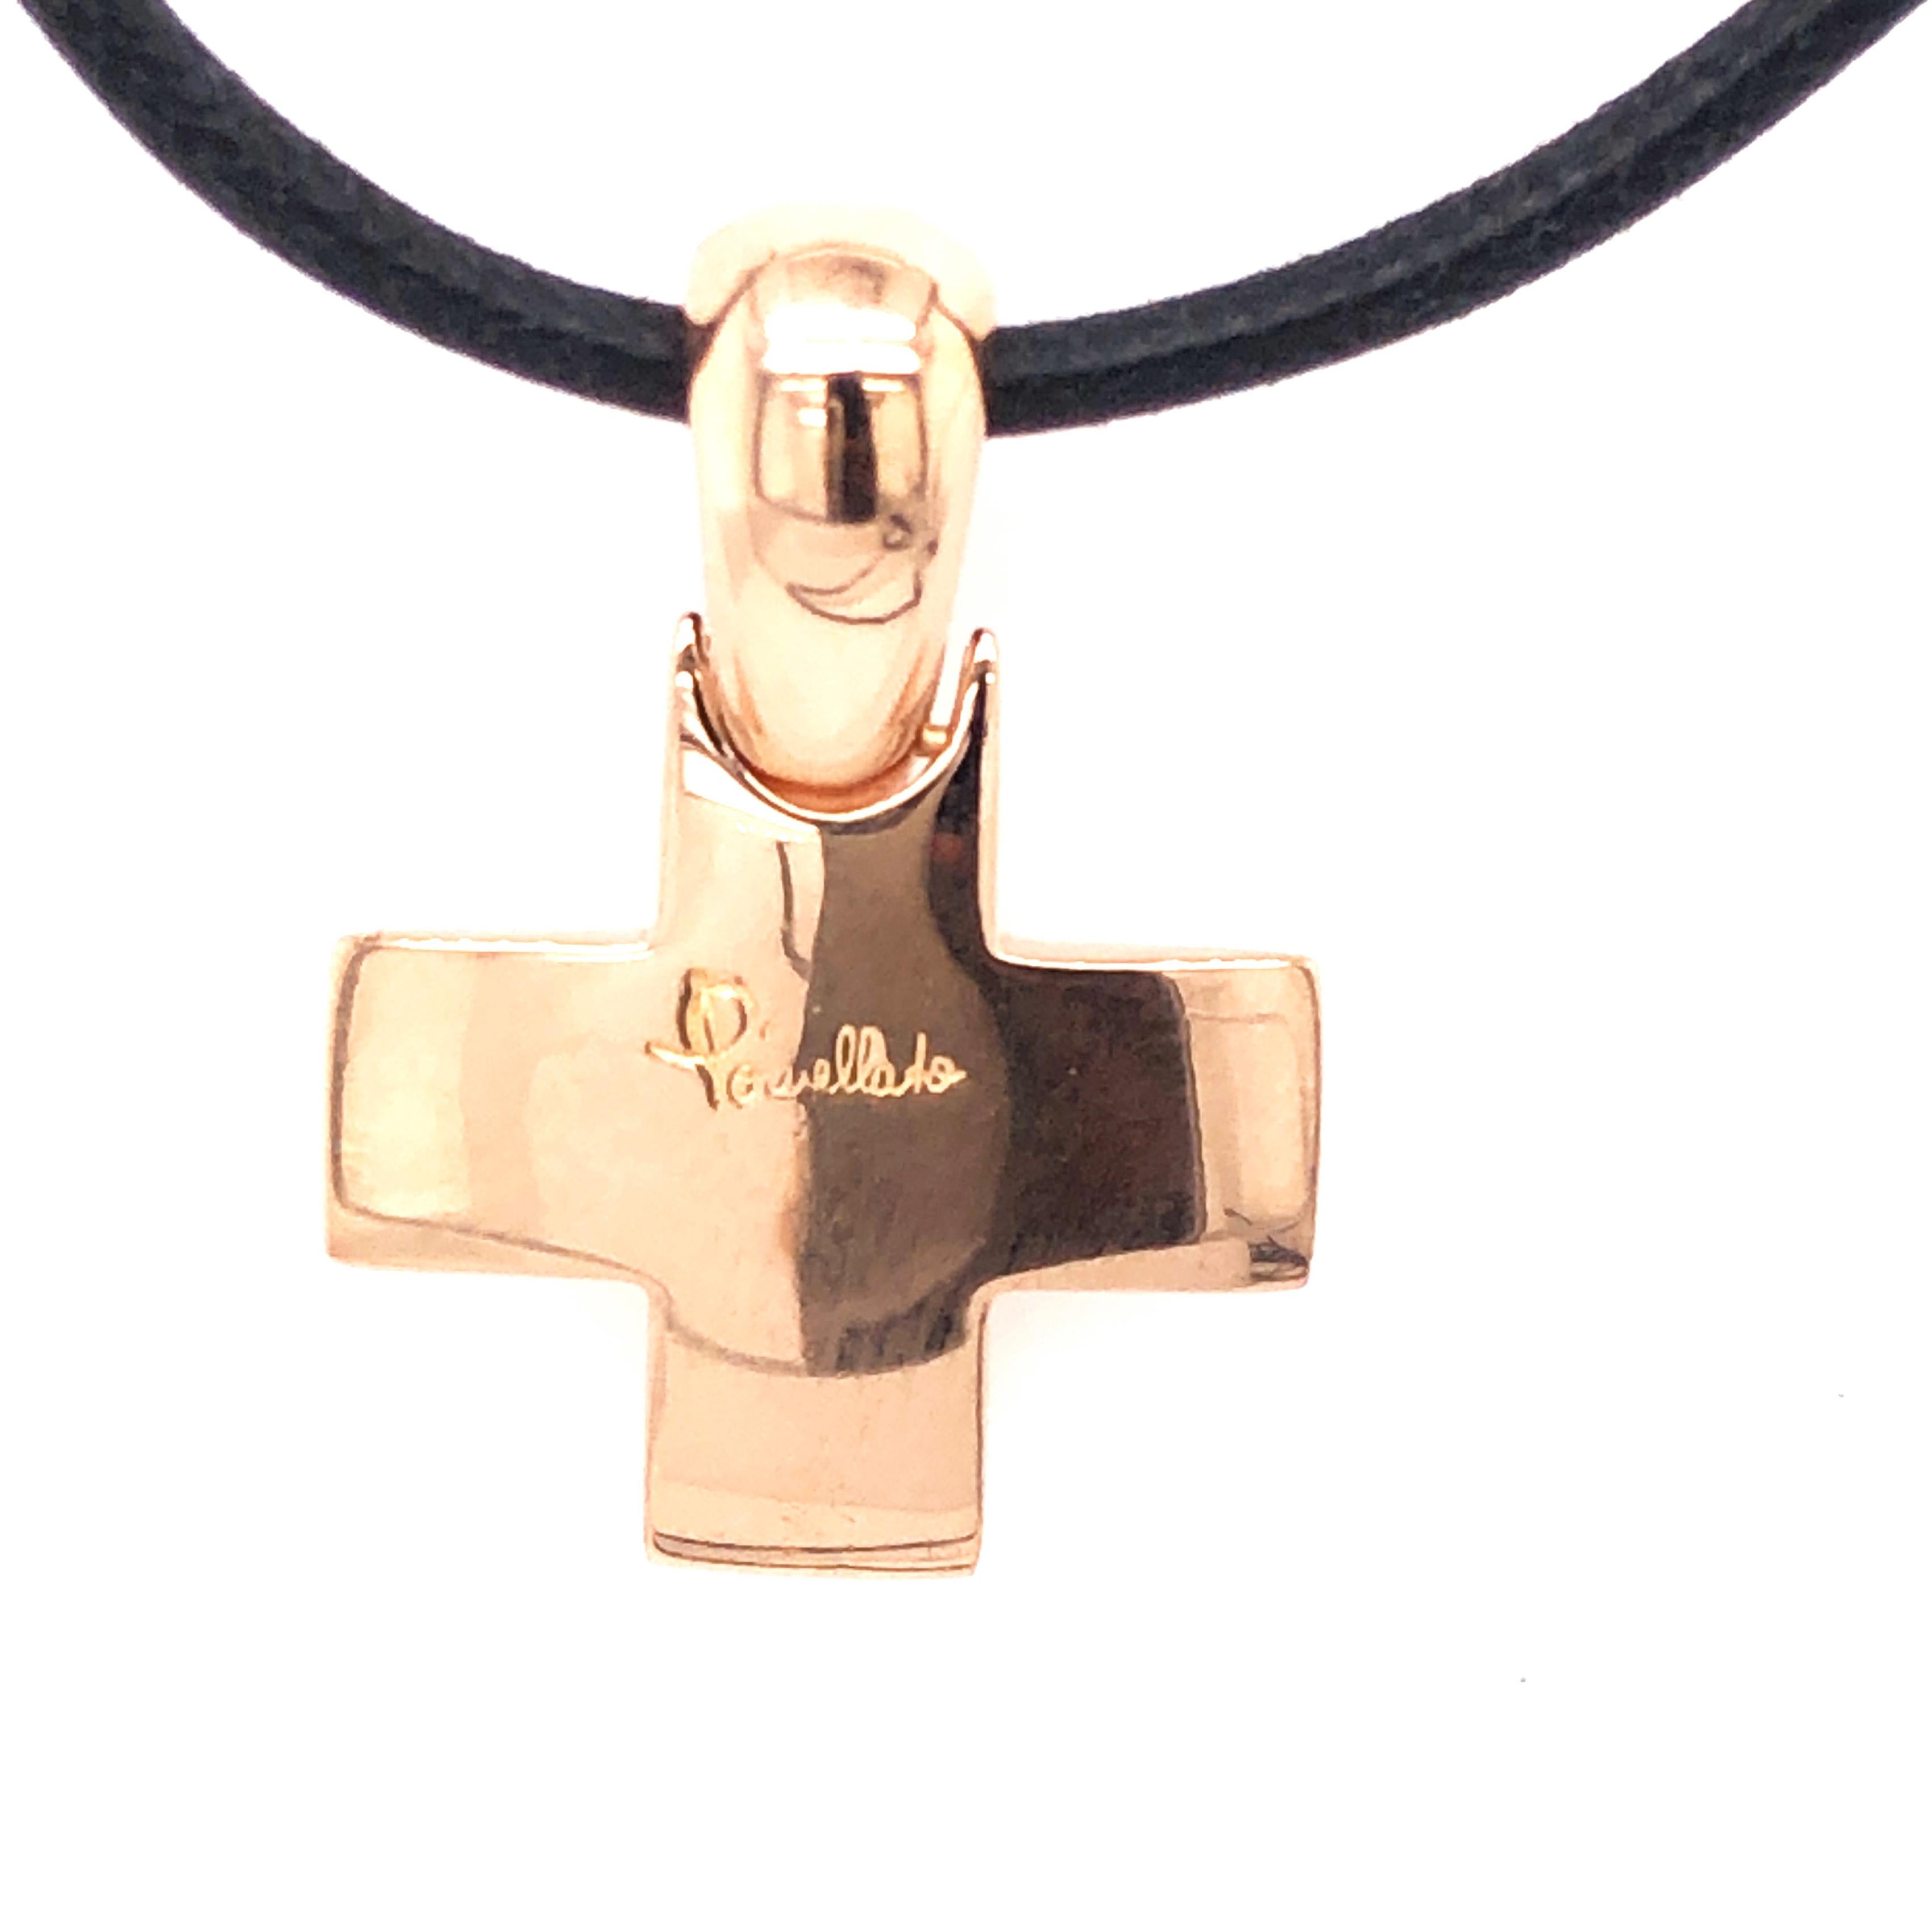 A Chic, Timeless Classic: Pomellato 18Kt Rose Gold Cross, perfect to wear with any attire.
In its original beautiful Red Lacquer case.
A Long Black leather ribbon is included.
Size: 0.787x0.984 inches